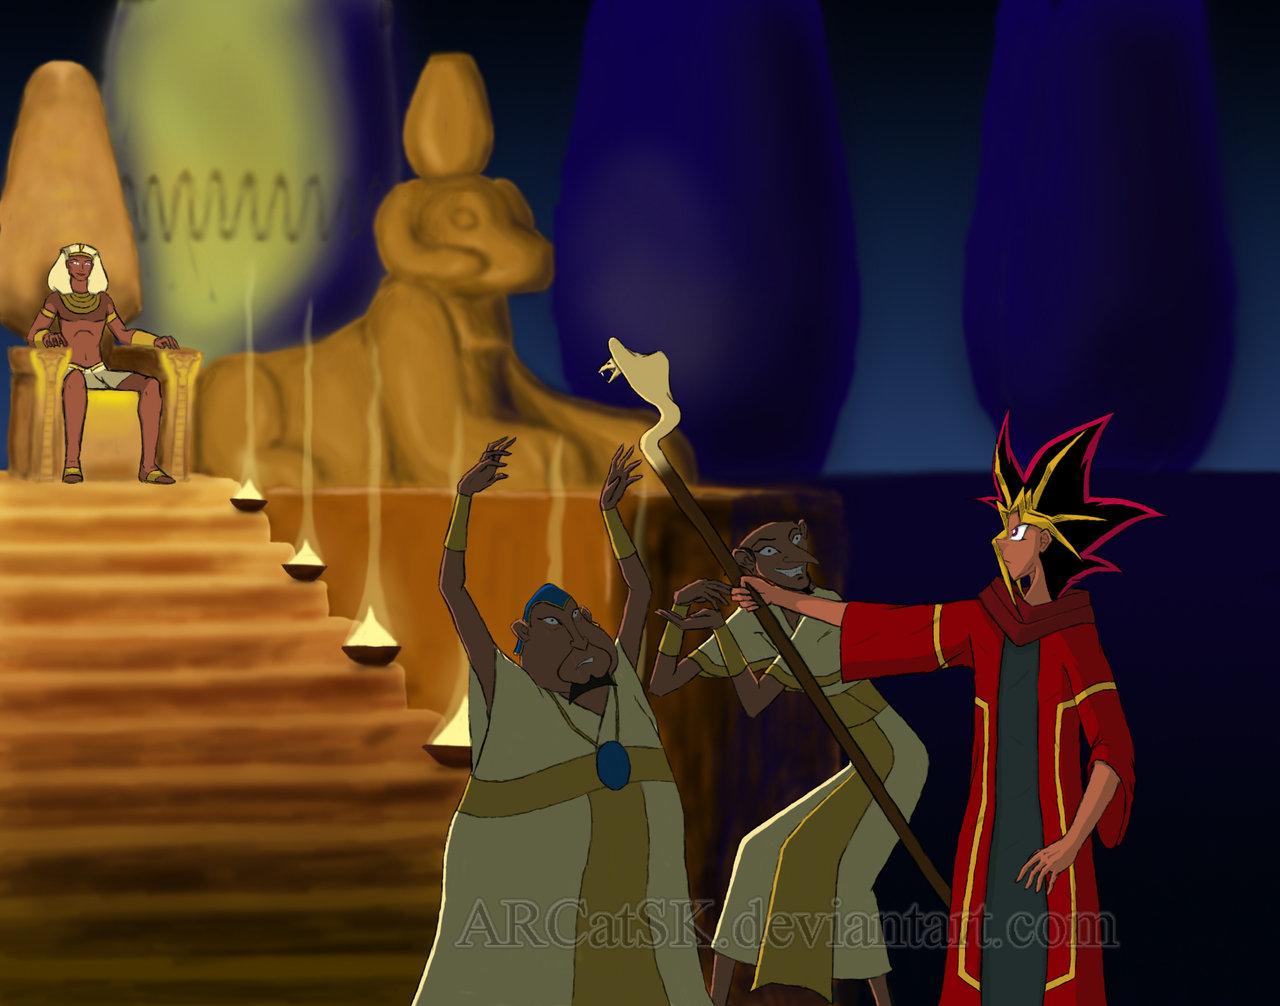 The Prince of Egypt Wallpaper